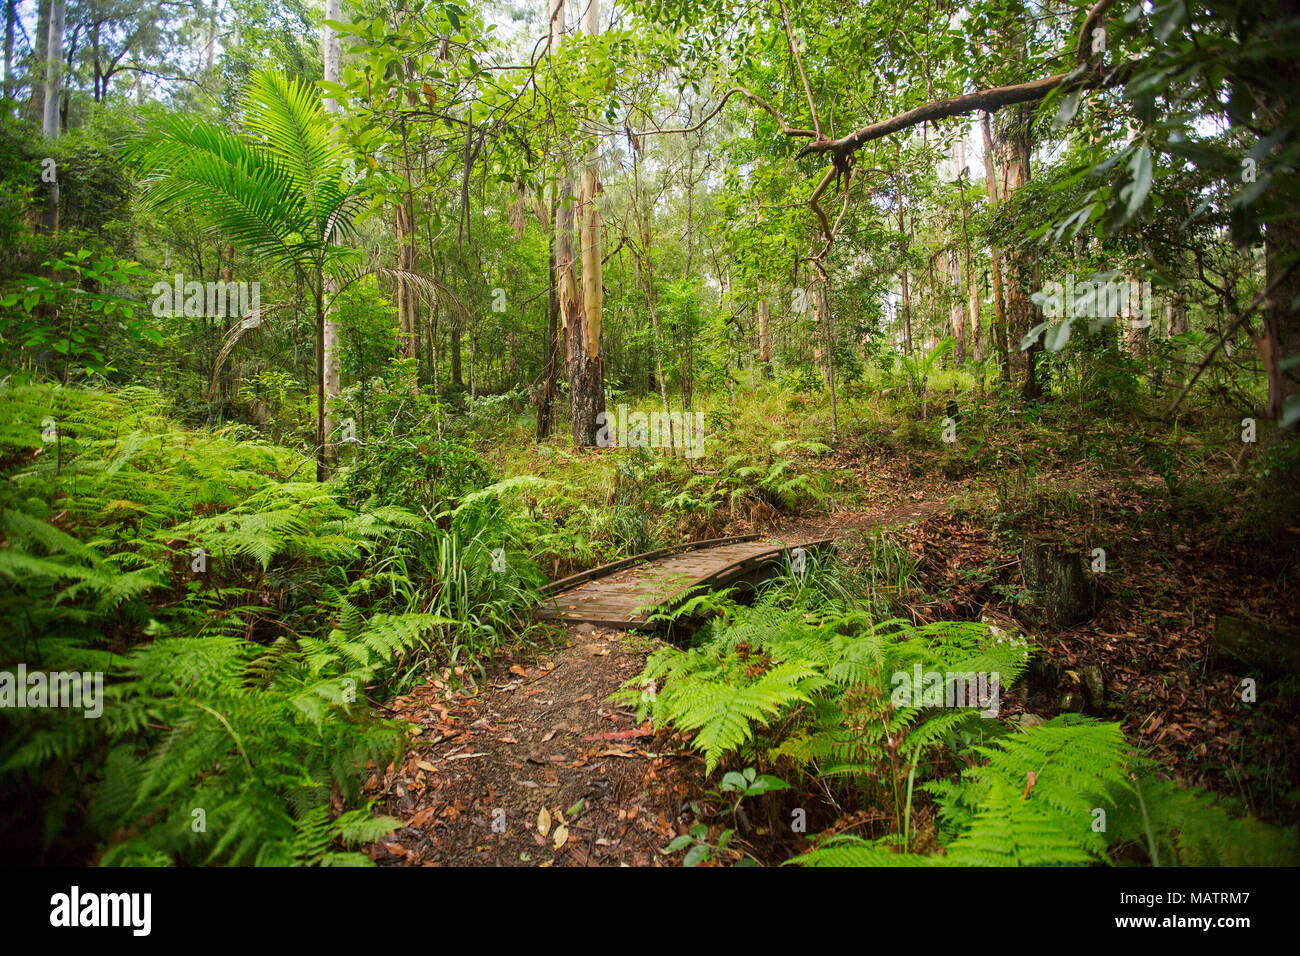 Dense emerald forests with ferns and bracken severed by narrow walking trail in Conondale Ranges National Park  Queensland Australia Stock Photo